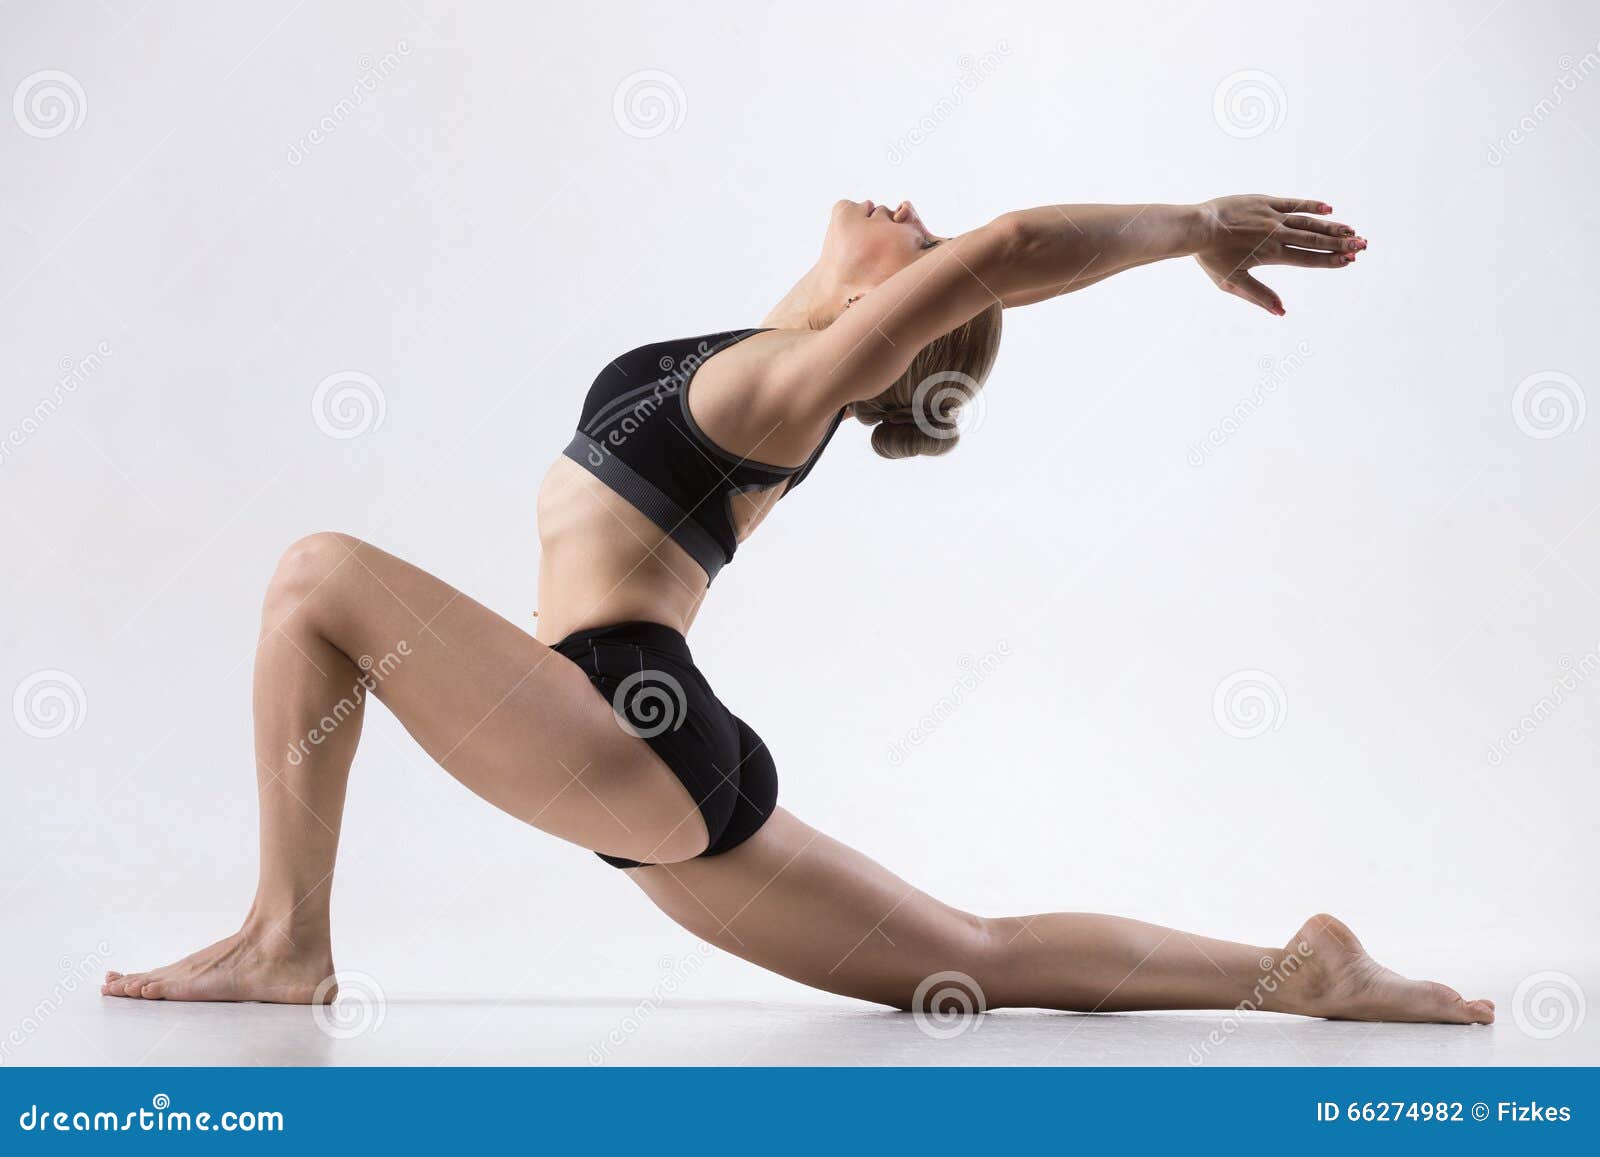 Yoga to improve Balance and Proprioception for Runners!